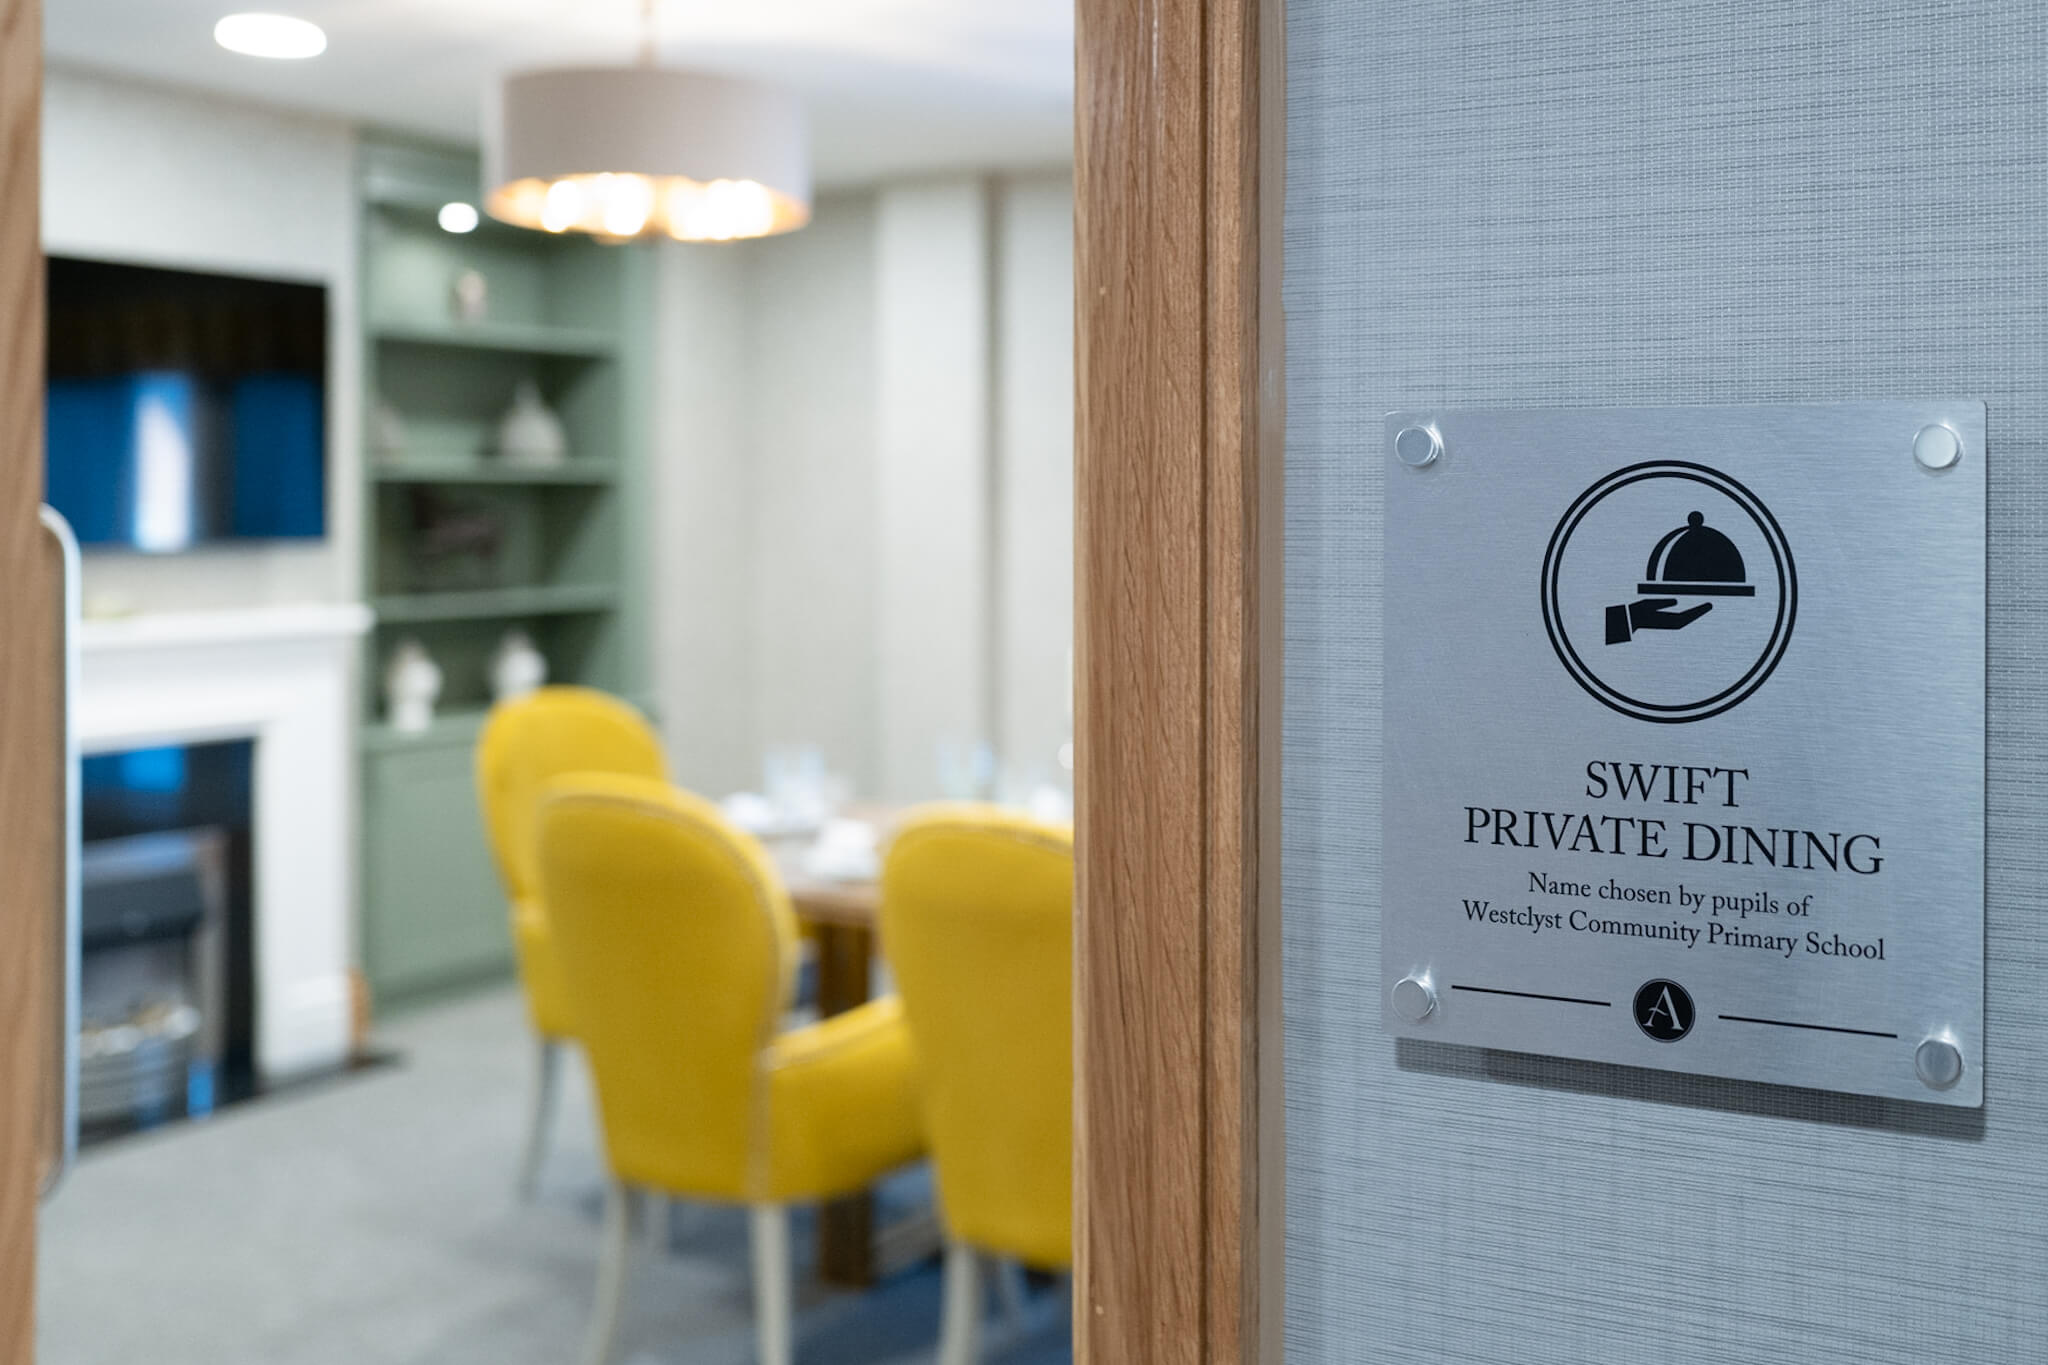 Sign "Swift Private Dining". Blurred image of private dining area. Yellow dining chairs. TV on wall.